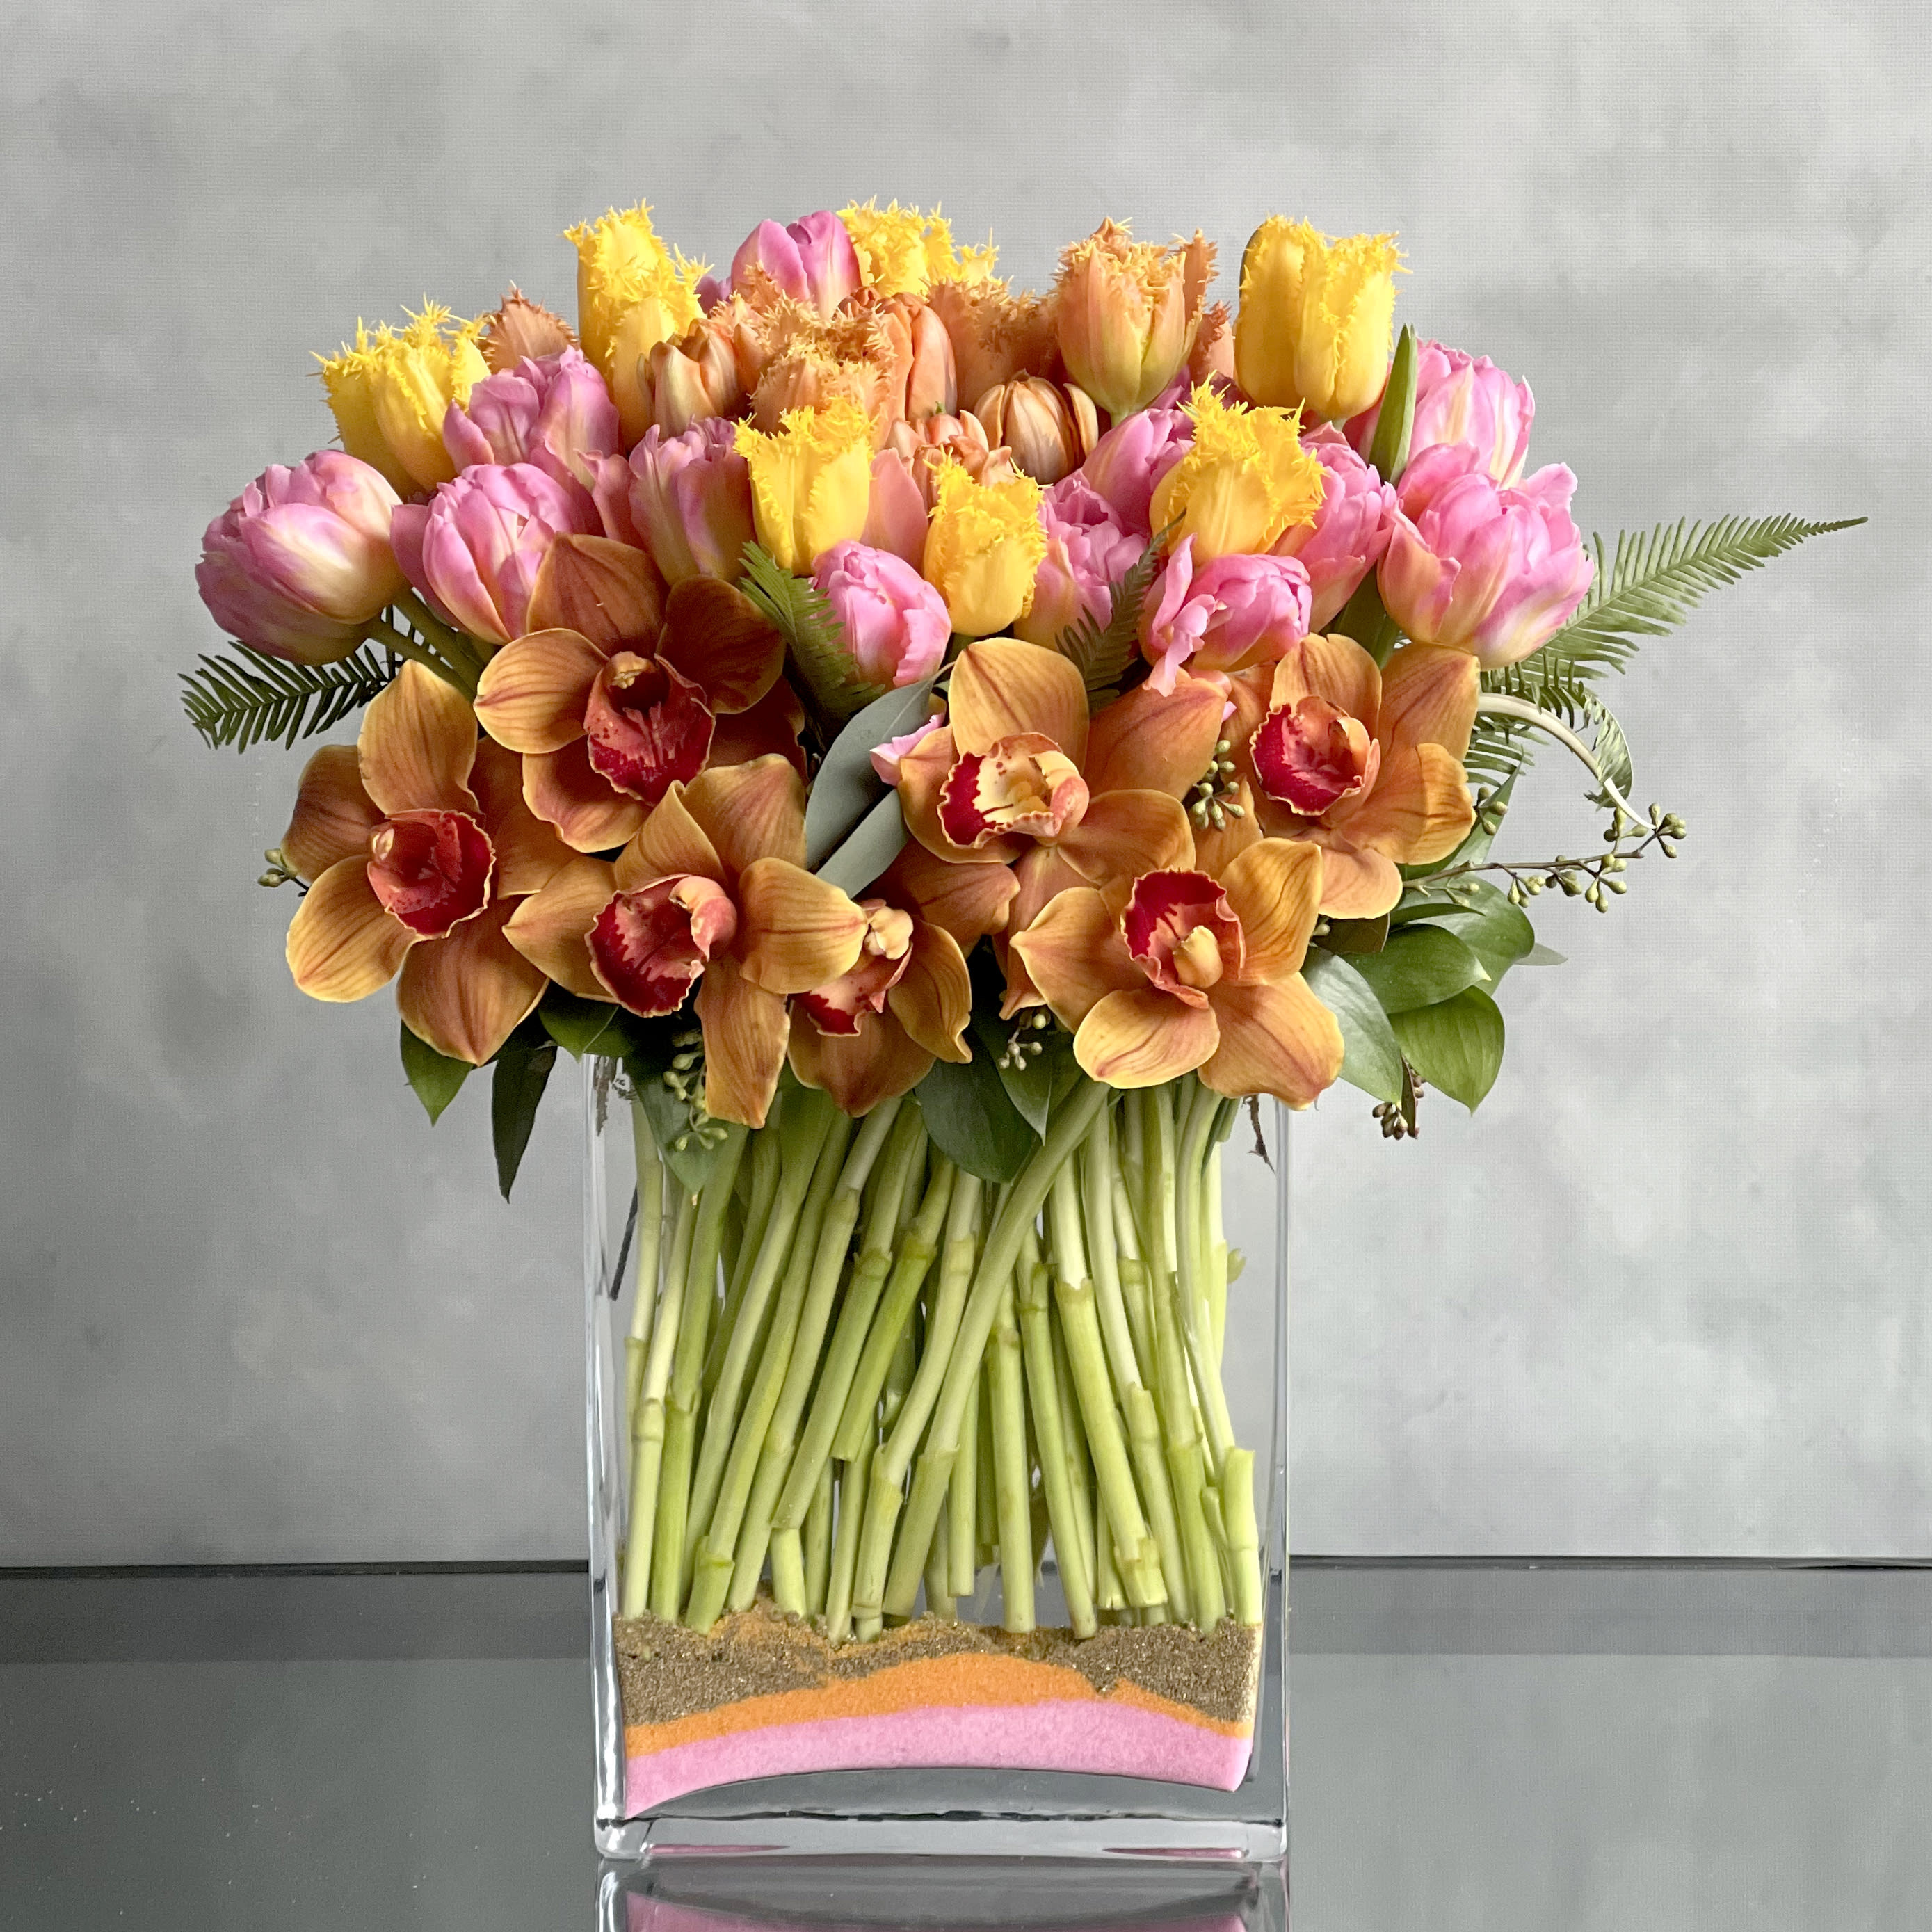 L'Orange!  - A modern twist to a classic flower! Various shades of colorful Tulips arranged within a rectangular vase, which is Accented with Orange Orchids. Vibrant and fresh just in time for the warming seasons. 